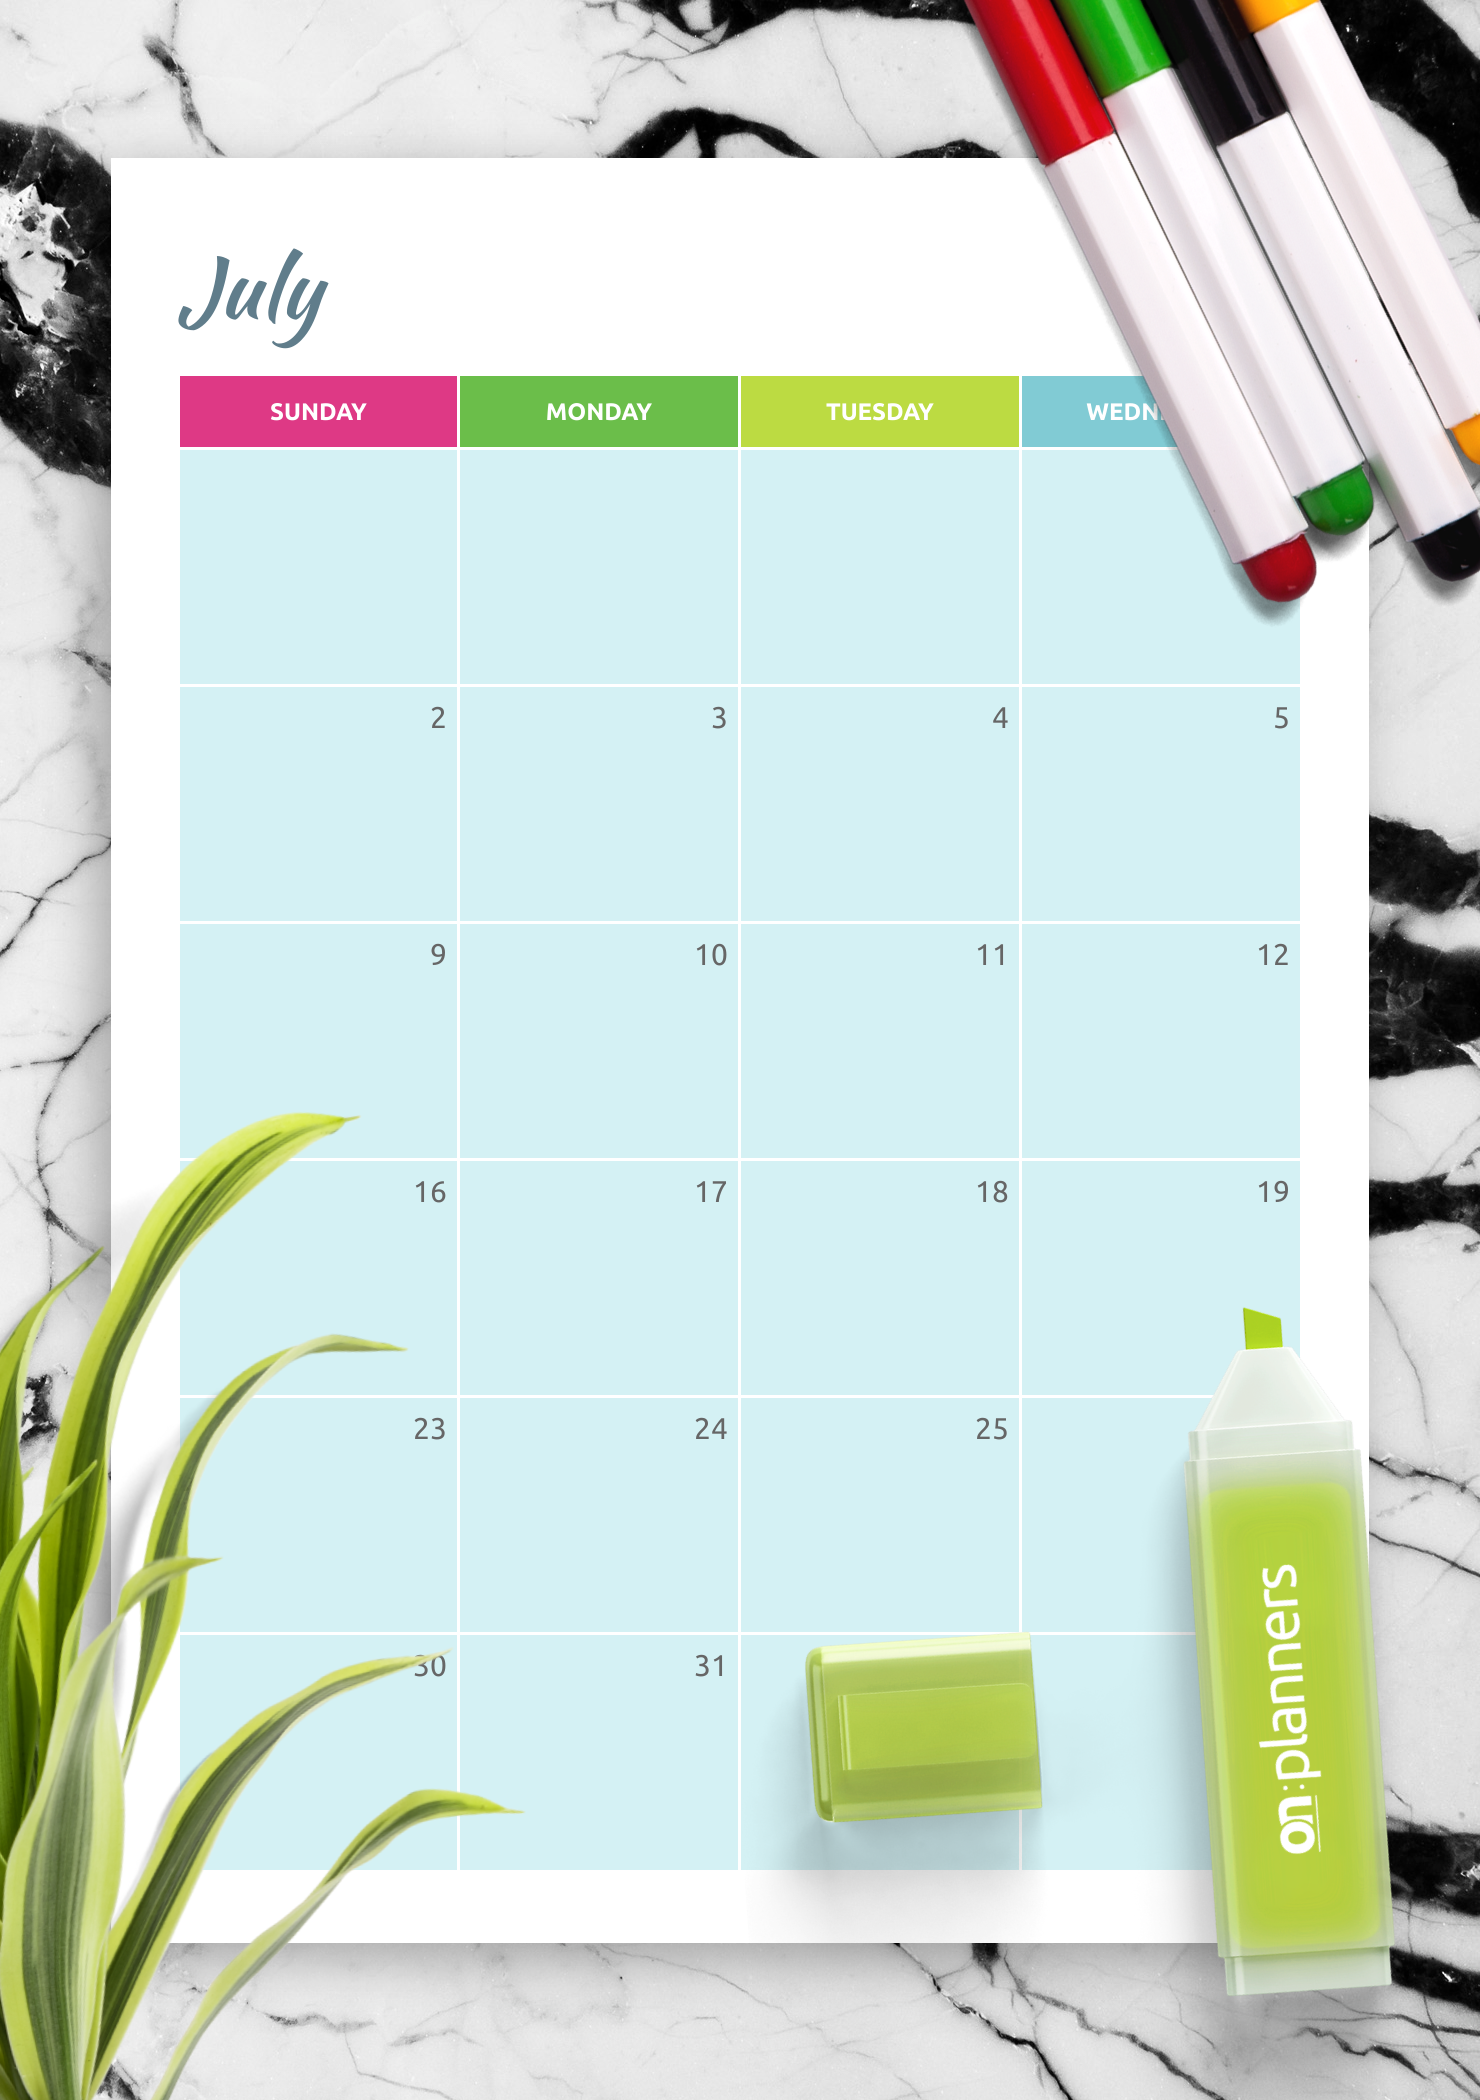 Printable July Calendar 2021 With Notes Portrait Editable July 2021 Calendar With Holidays And